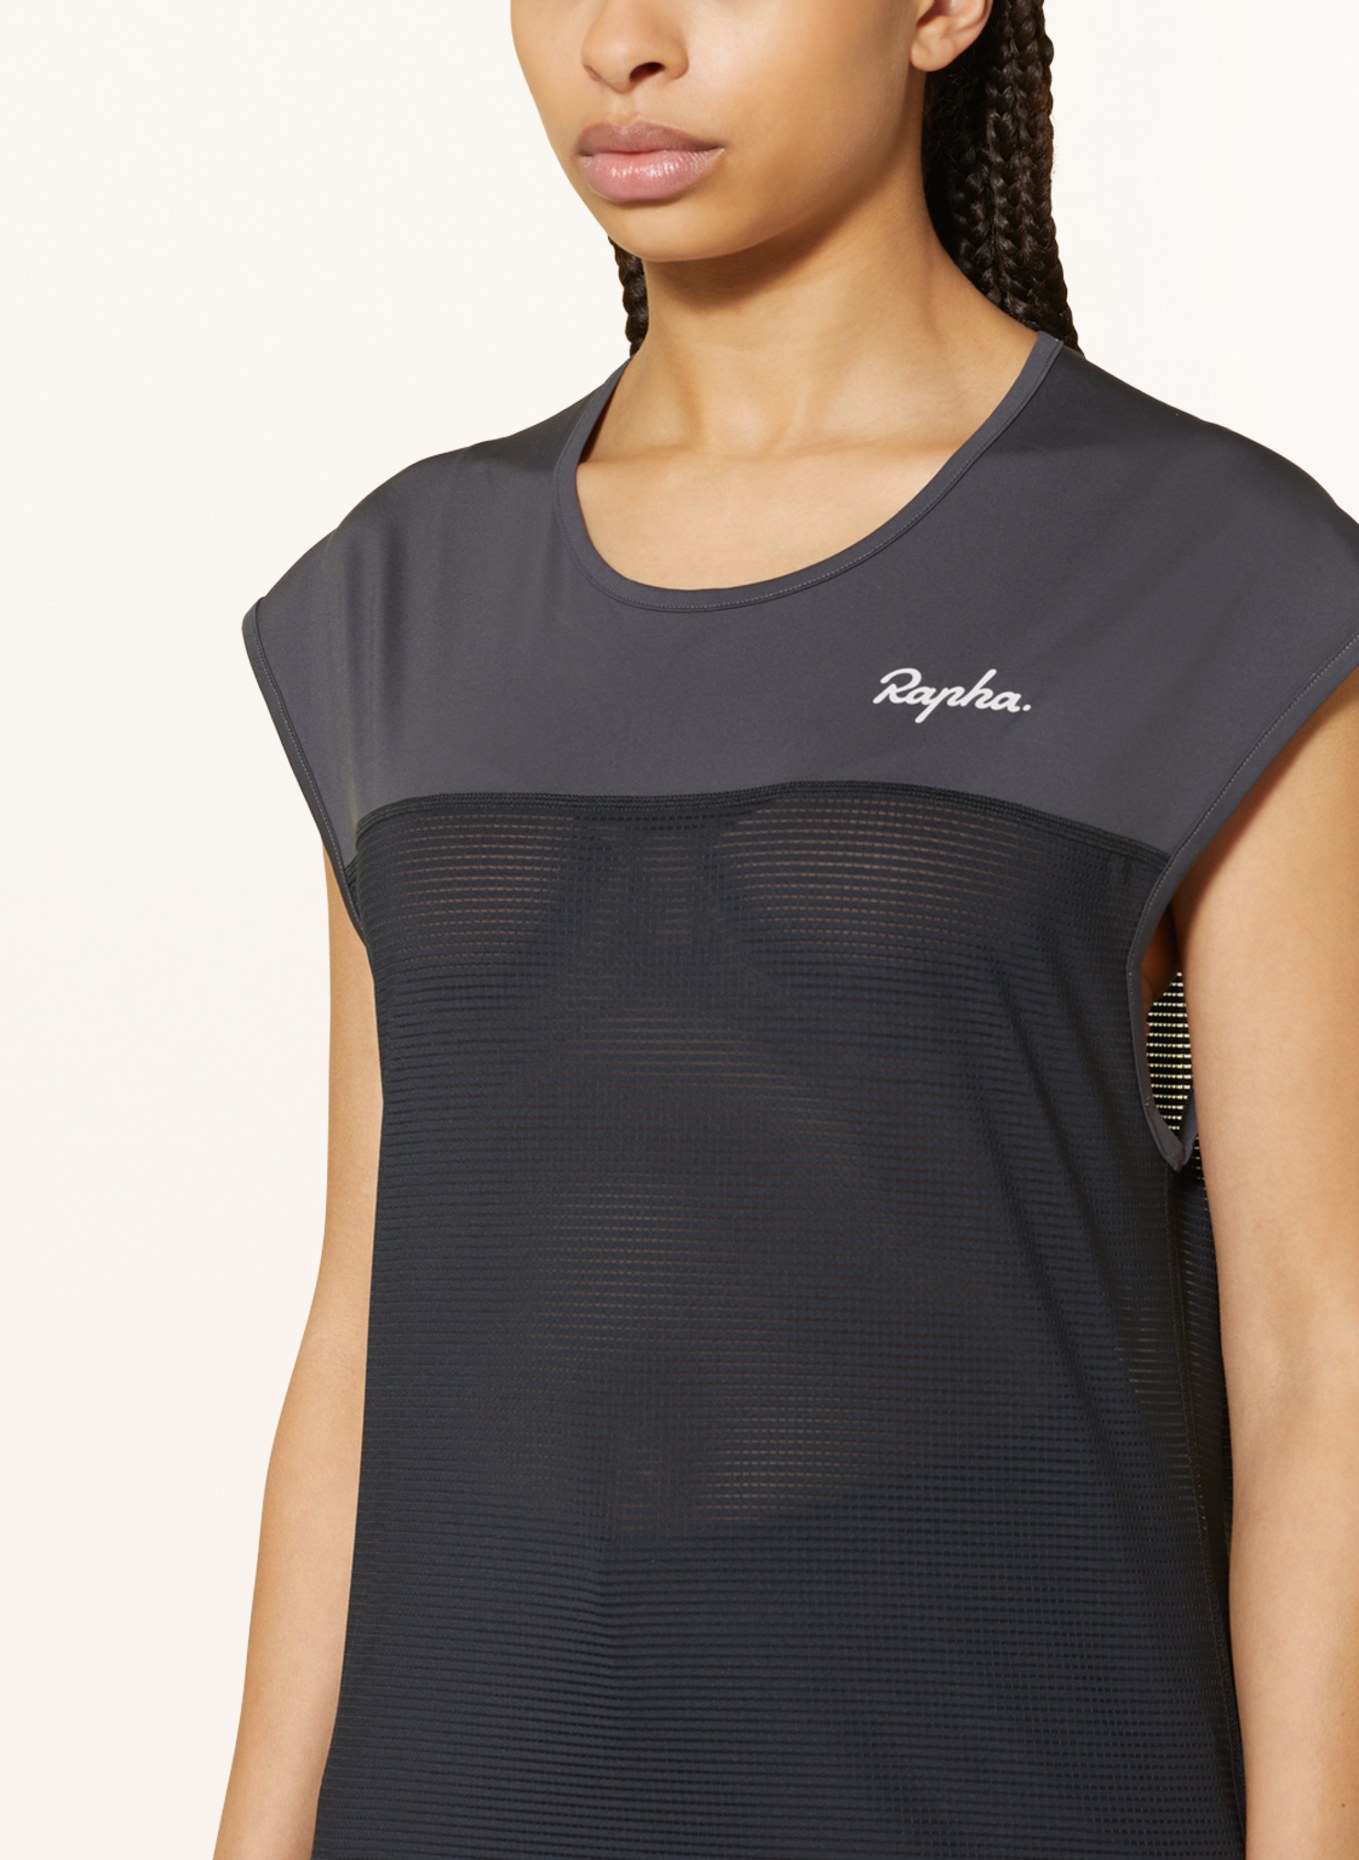 Rapha Cycling top TRAIL LIGHTWEIGHT made of mesh, Color: BLACK (Image 4)